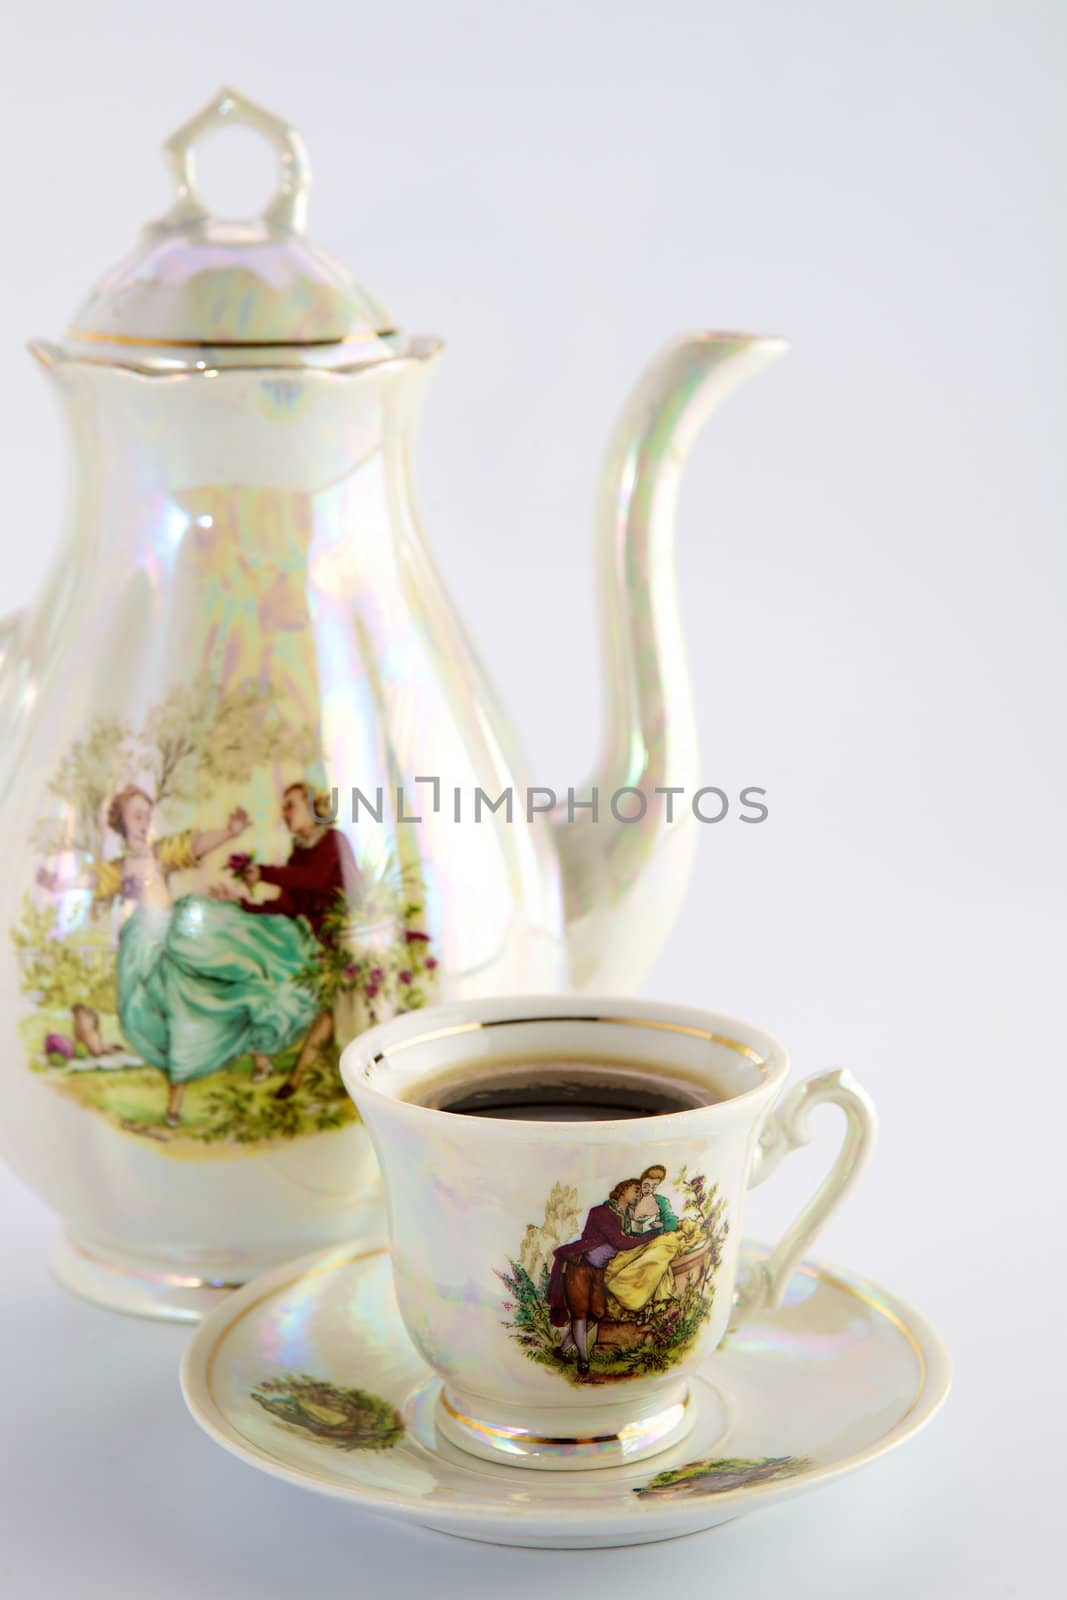 Coffee pot and cup by pozitivstudija